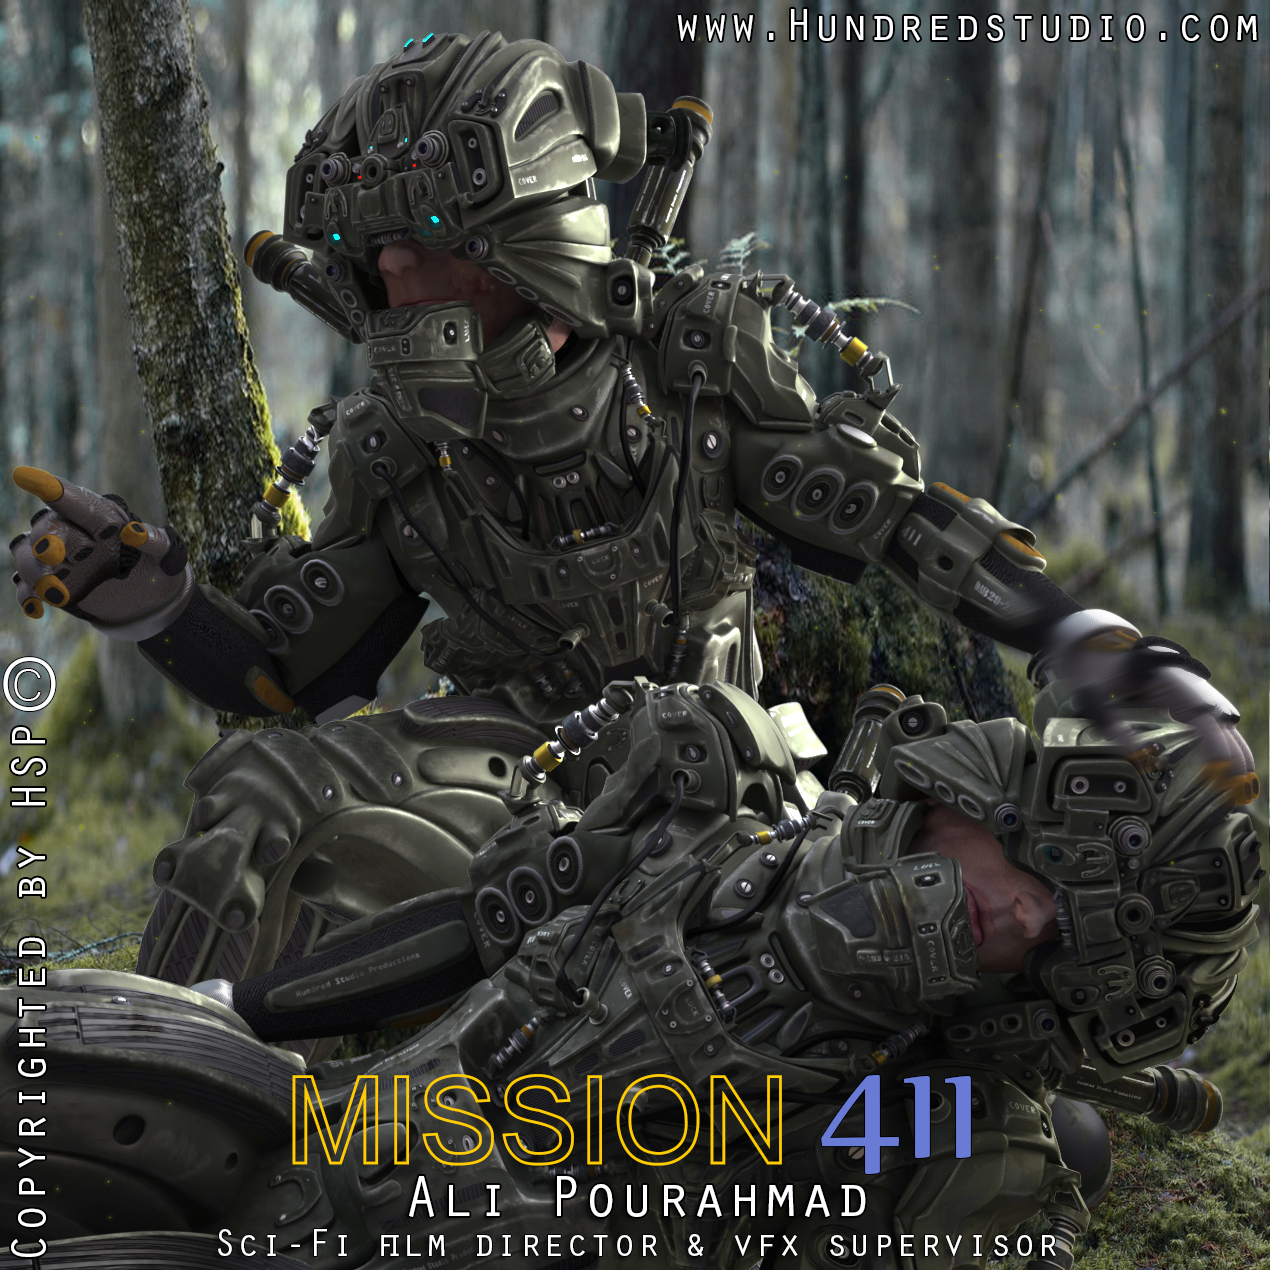 VFX_SCi_Fi_Science_fiction_movies_Hollywood_vfx_Bollywood_vfx_Iran_vfx_Dubai_vfx_Iran_Sci_Fi_movies_Hollywood_sci_fi_movies_Ali_Pourahmad_Robot_Soldier_%D8%AC%D9%84%D9%88%D9%87_%D9%87%D8%A7%DB%8C_%D9%88%DB%8C%DA%98%D9%87_%D8%AC%D9%84%D9%88%D9%87_%D9%87%D8%A7%DB%8C_%D8%A8%D8%B5%D8%B1%DB%8C_%D8%AC%D9%84%D9%88%D9%87_%D9%87%D8%A7%DB%8C_%D9%88%DB%8C%DA%98%D9%87_%D8%B3%DB%8C%D9%86%D9%85%D8%A7%DB%8C%DB%8C_%D8%B9%D9%84%DB%8C_%D9%BE%D9%88%D8%B1%D8%A7%D8%AD%D9%85%D8%AF_AB17.jpg